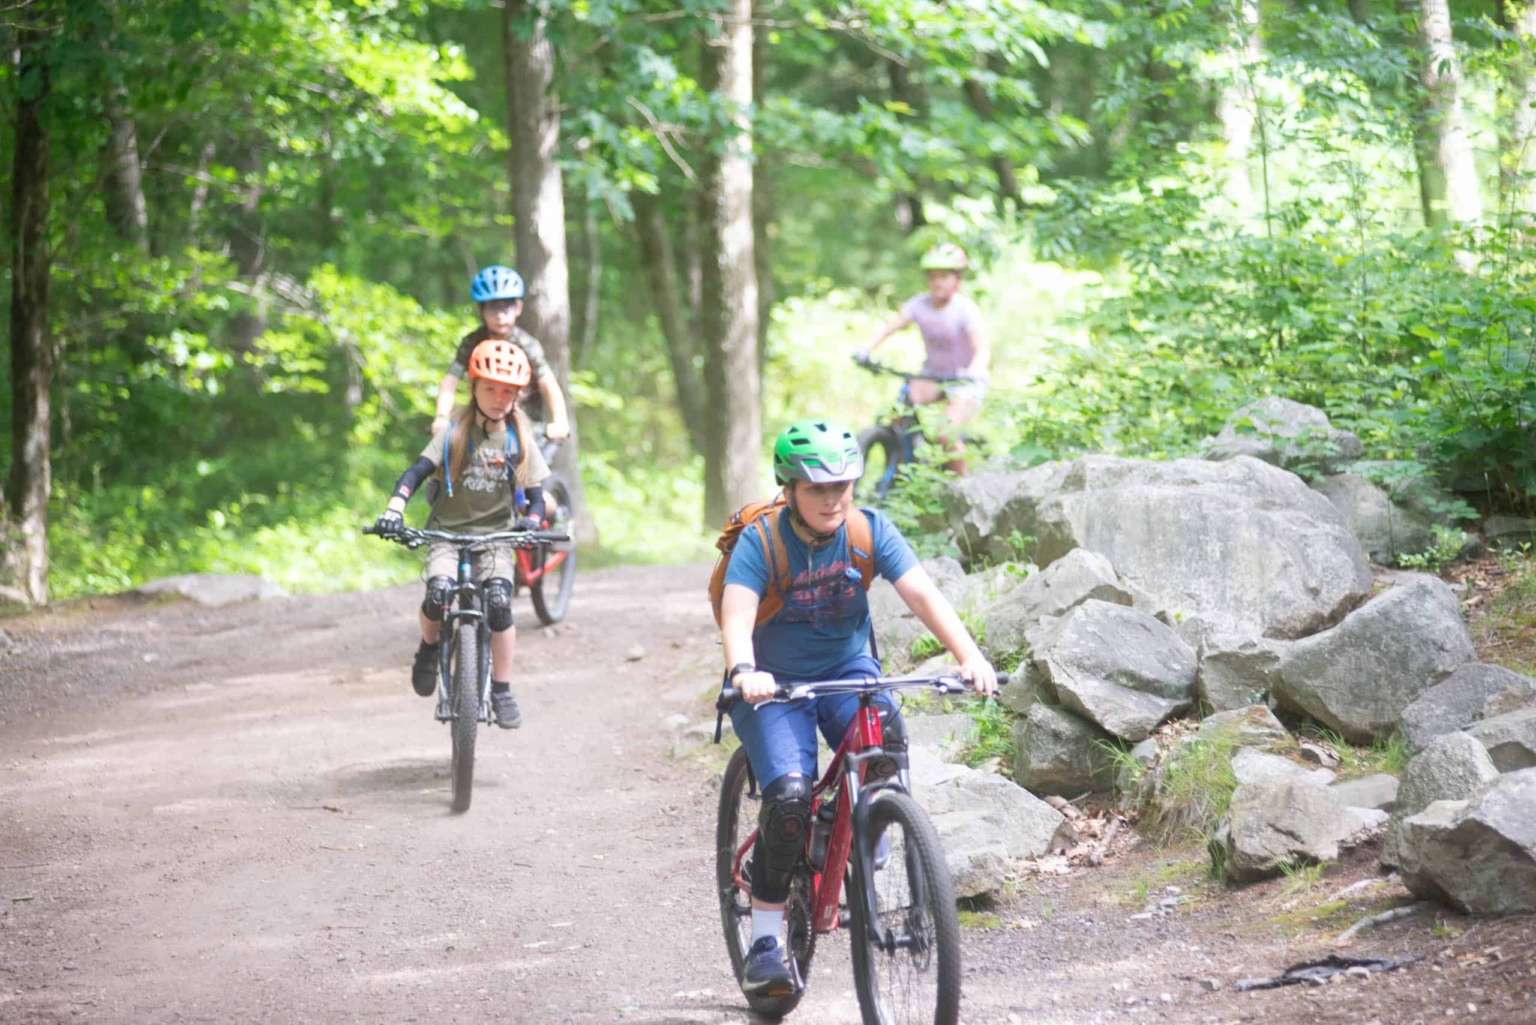 A group of people riding bikes on a trail in the woods.